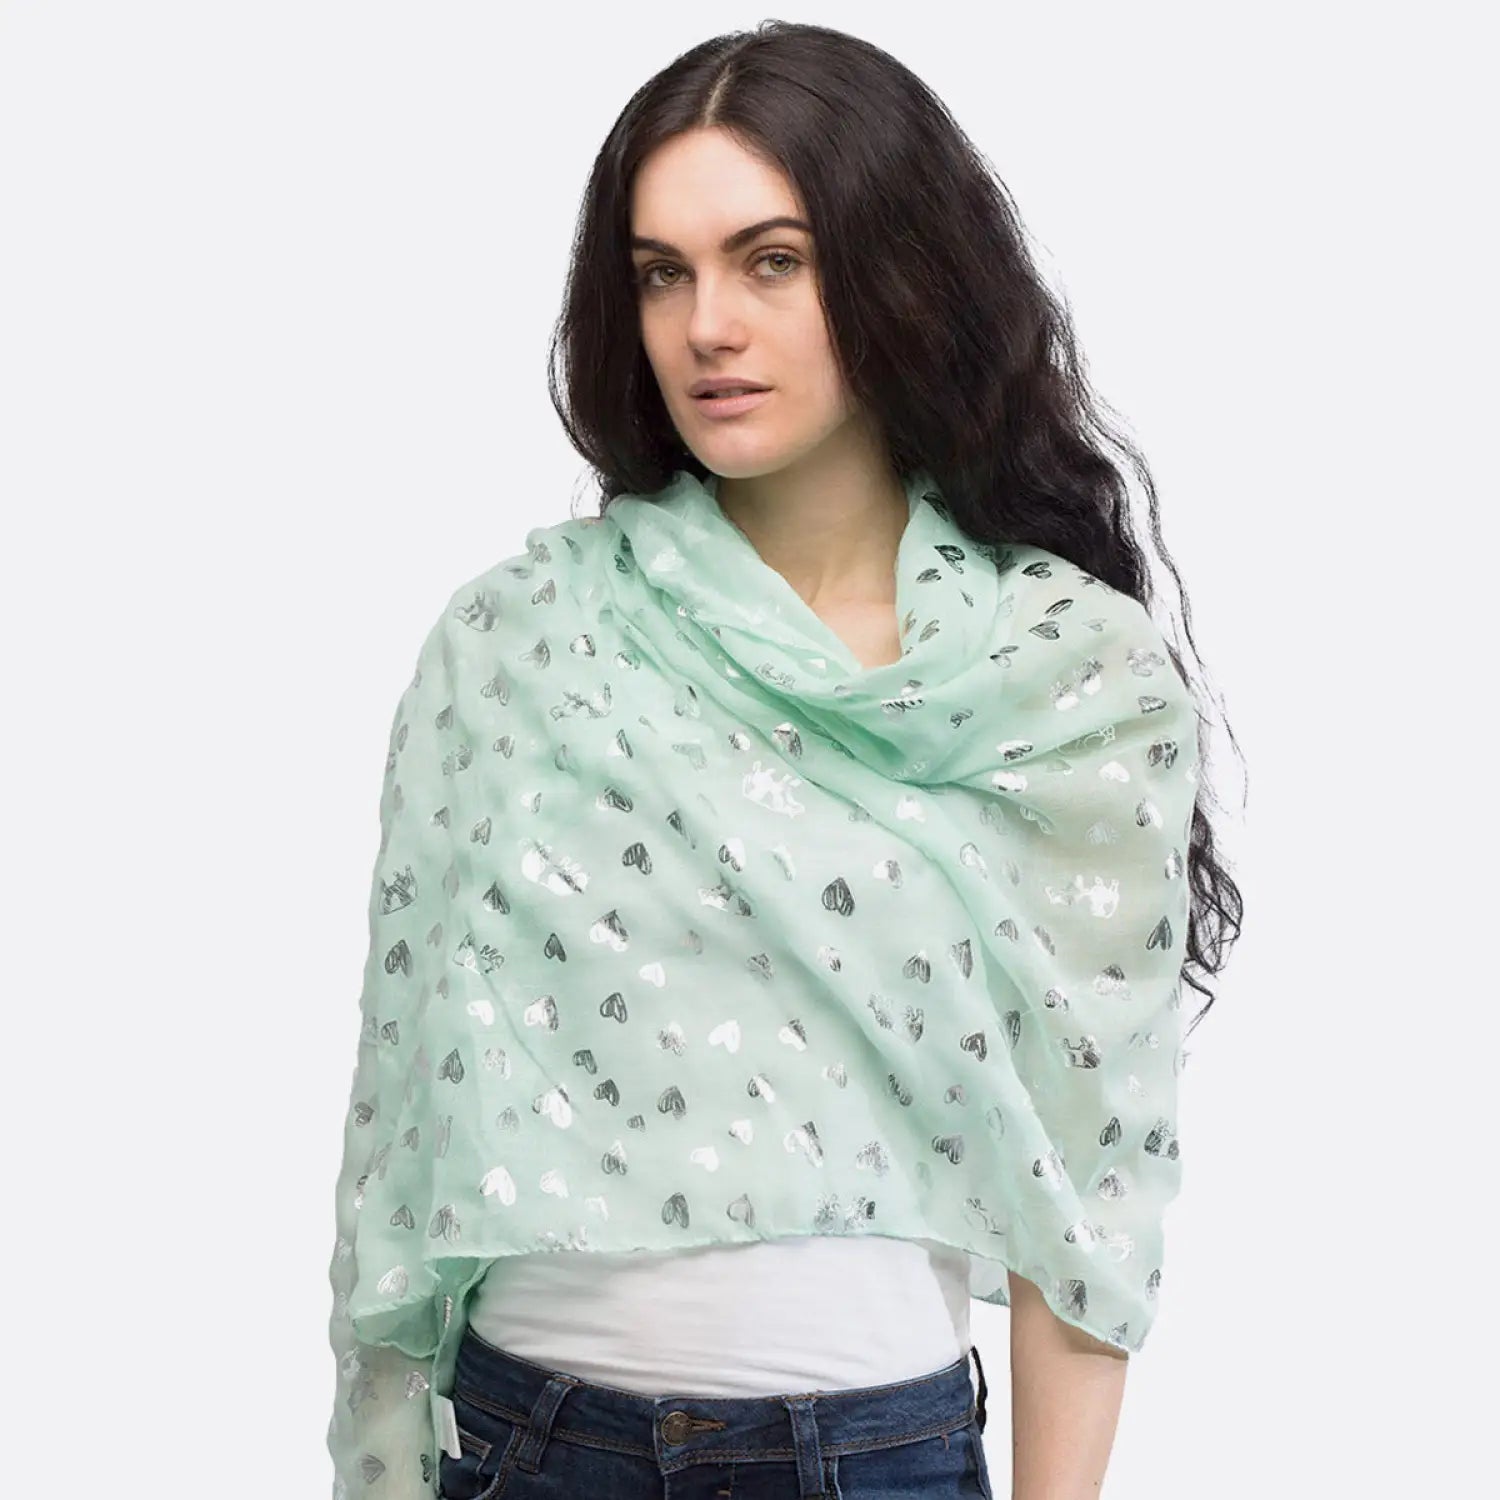 Oversized green scarf with cow print design on silver foil fabric